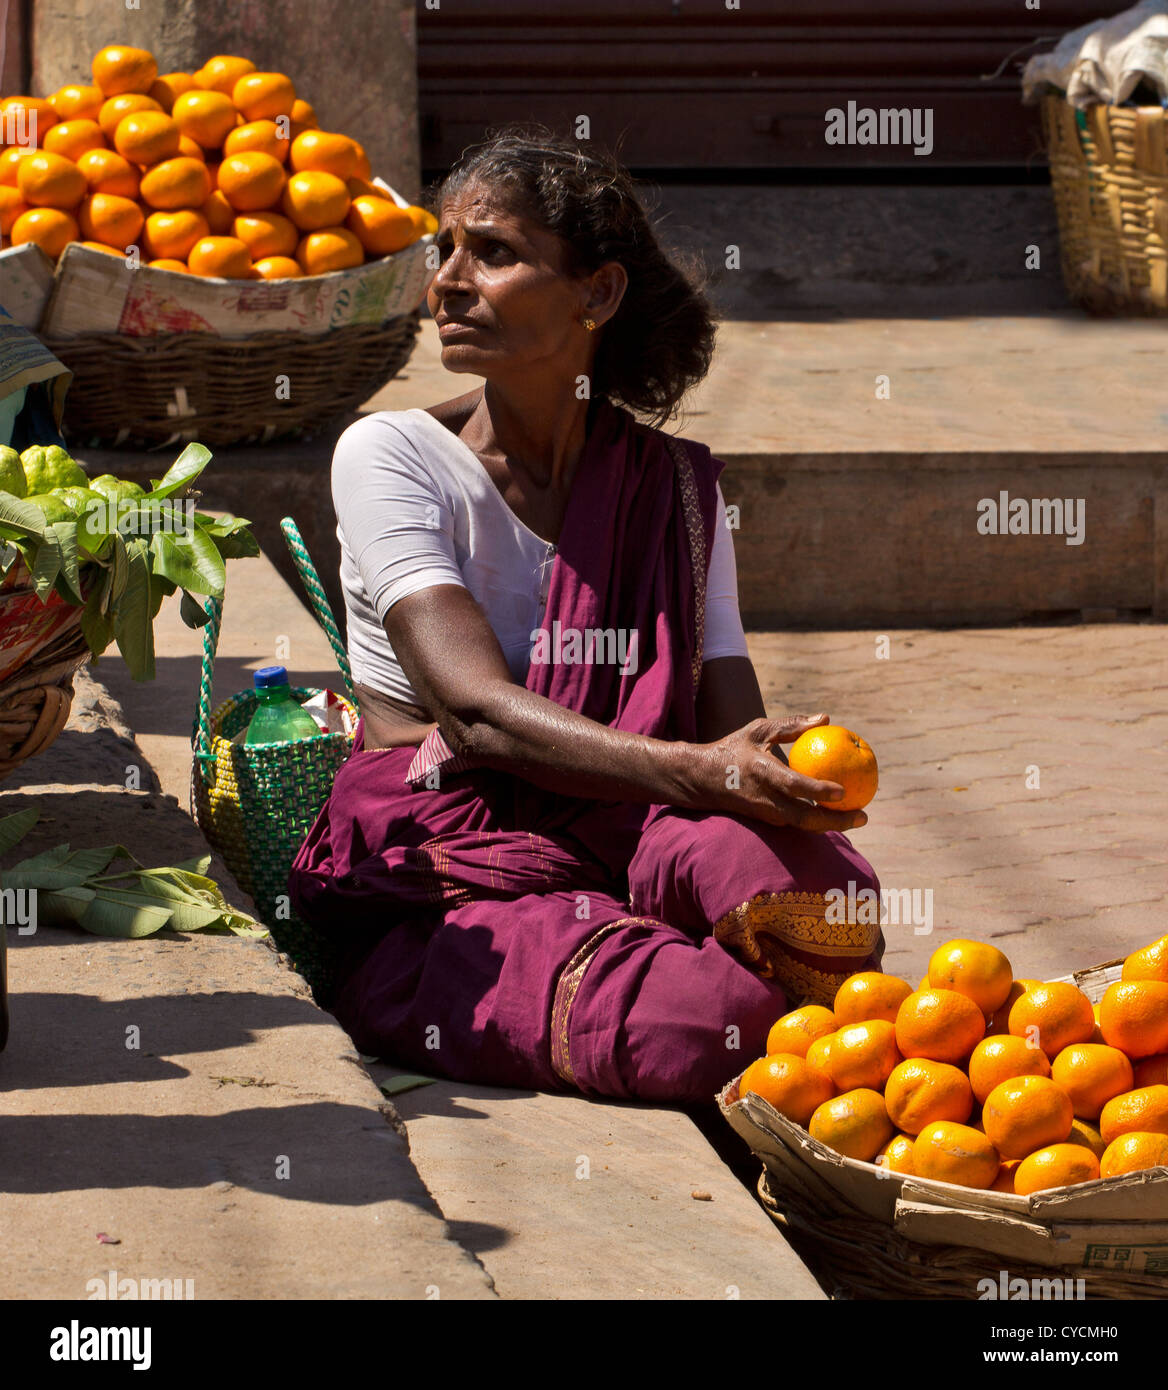 A SELLER OF ORANGES IN A MARKET IN MADURAI INDIA Stock Photo